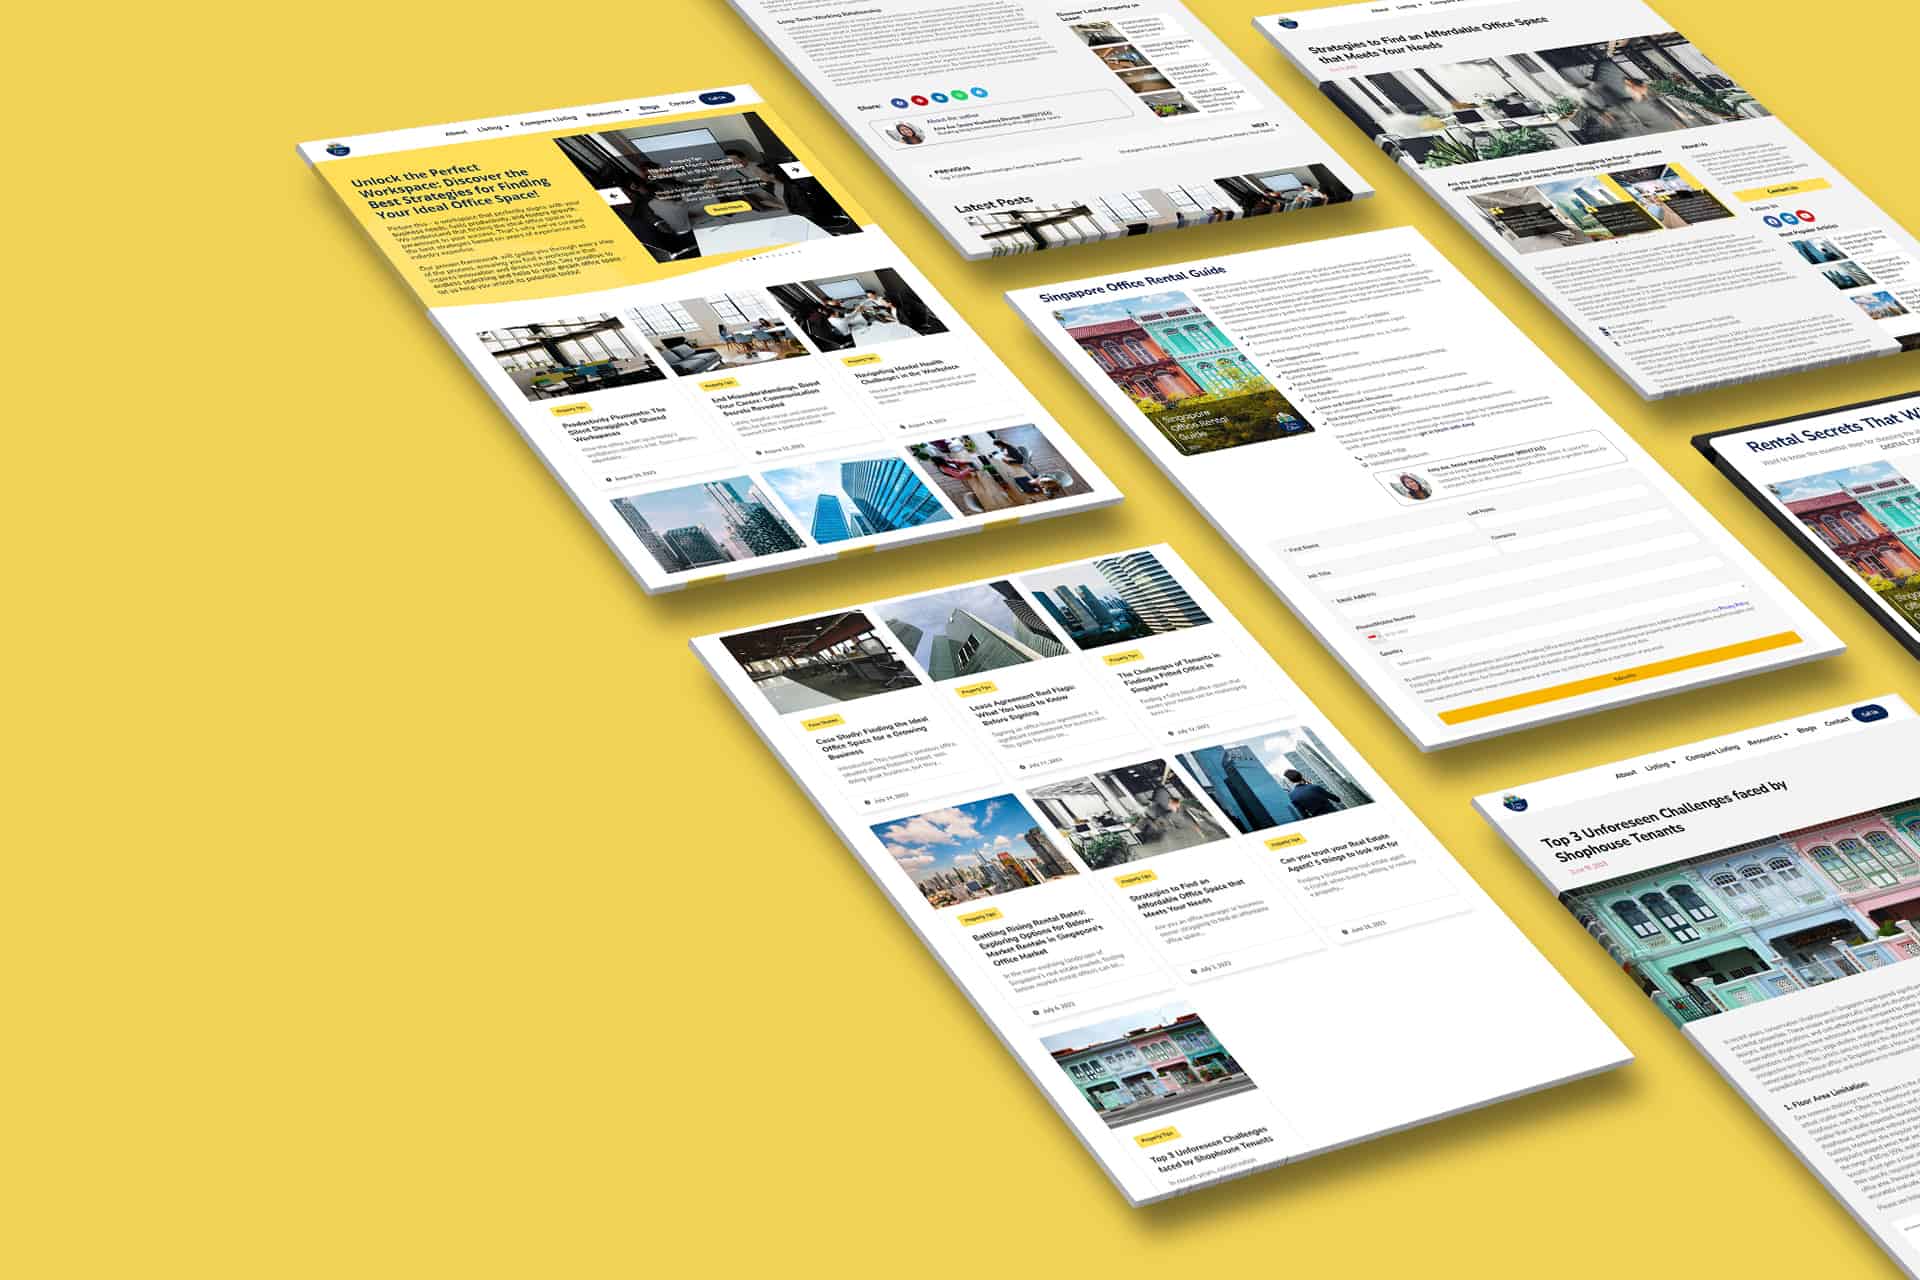 A visually appealing homepage of a real estate website featuring property listings, created using custom WordPress web development on a vibrant yellow background.